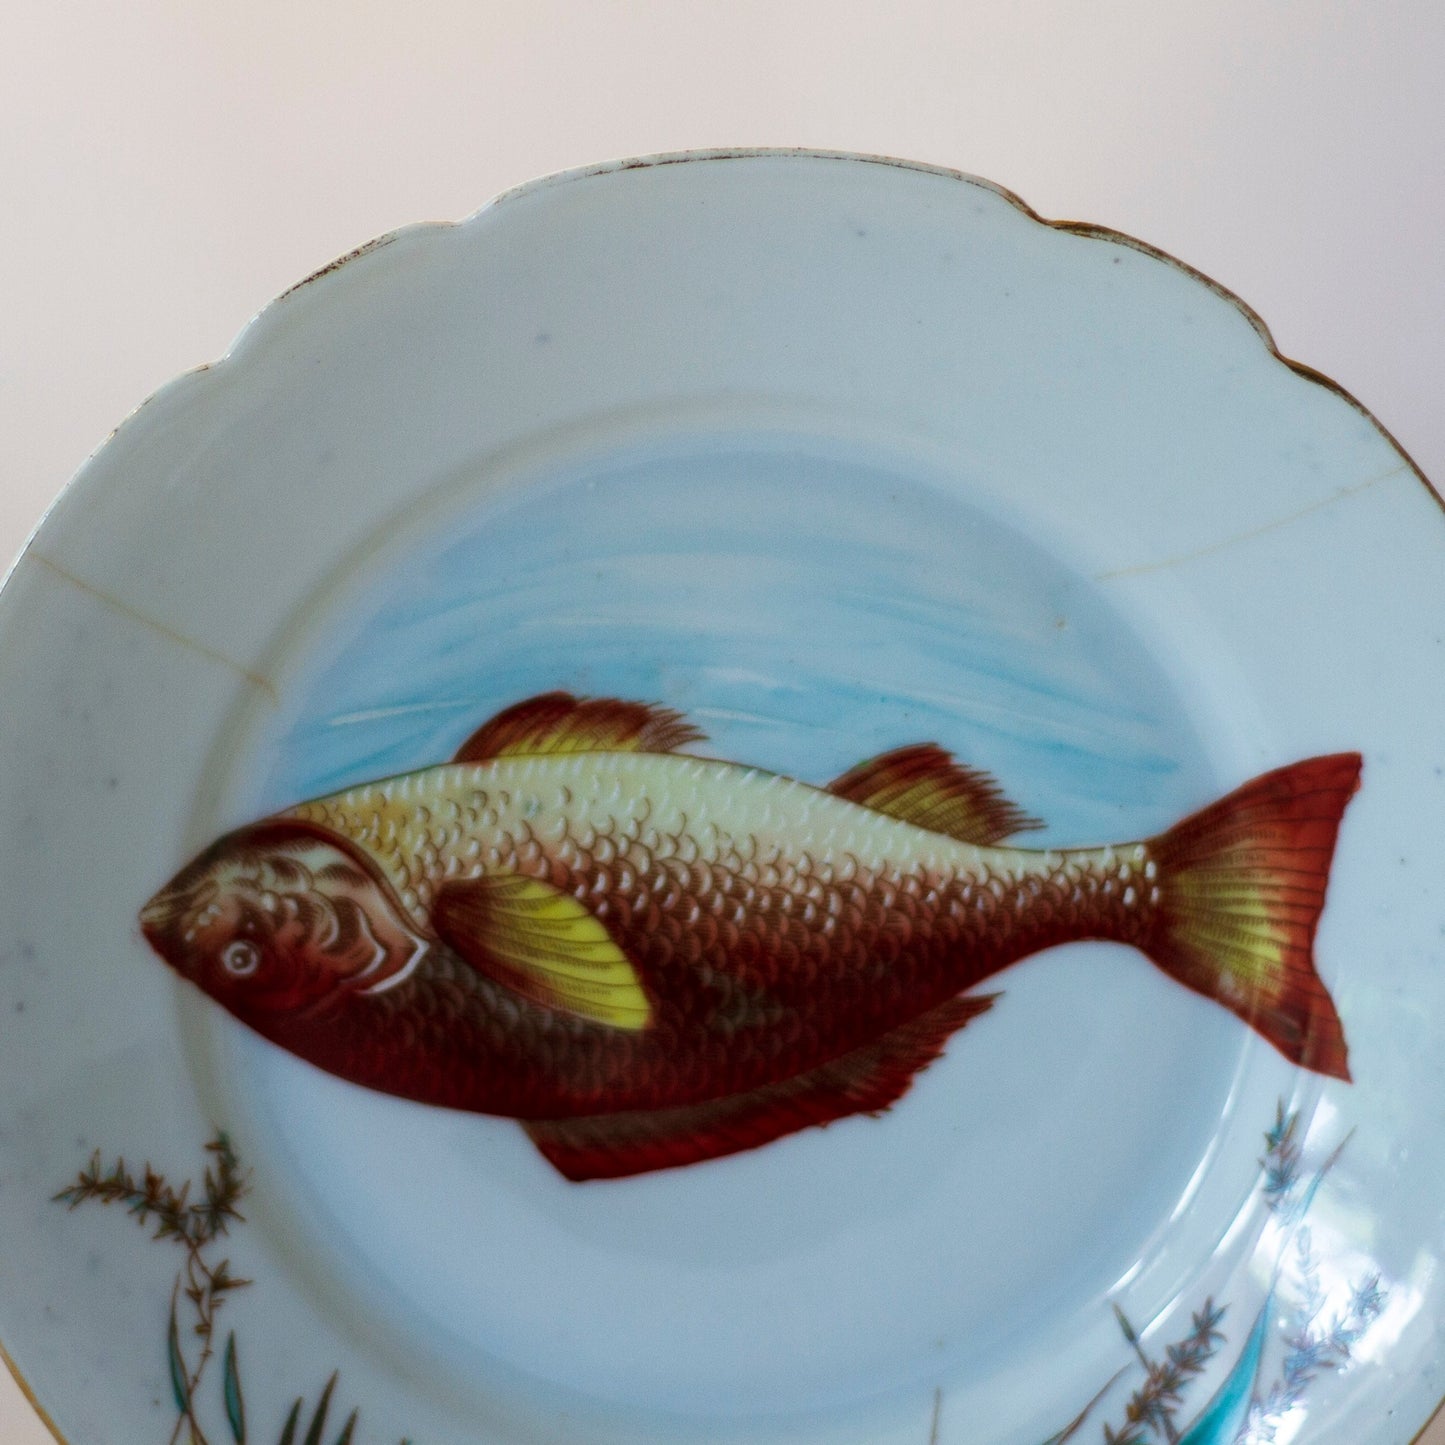 Hinrichs & Company TRANSFERWARE FISH PLATE with Hand Painted Highlights